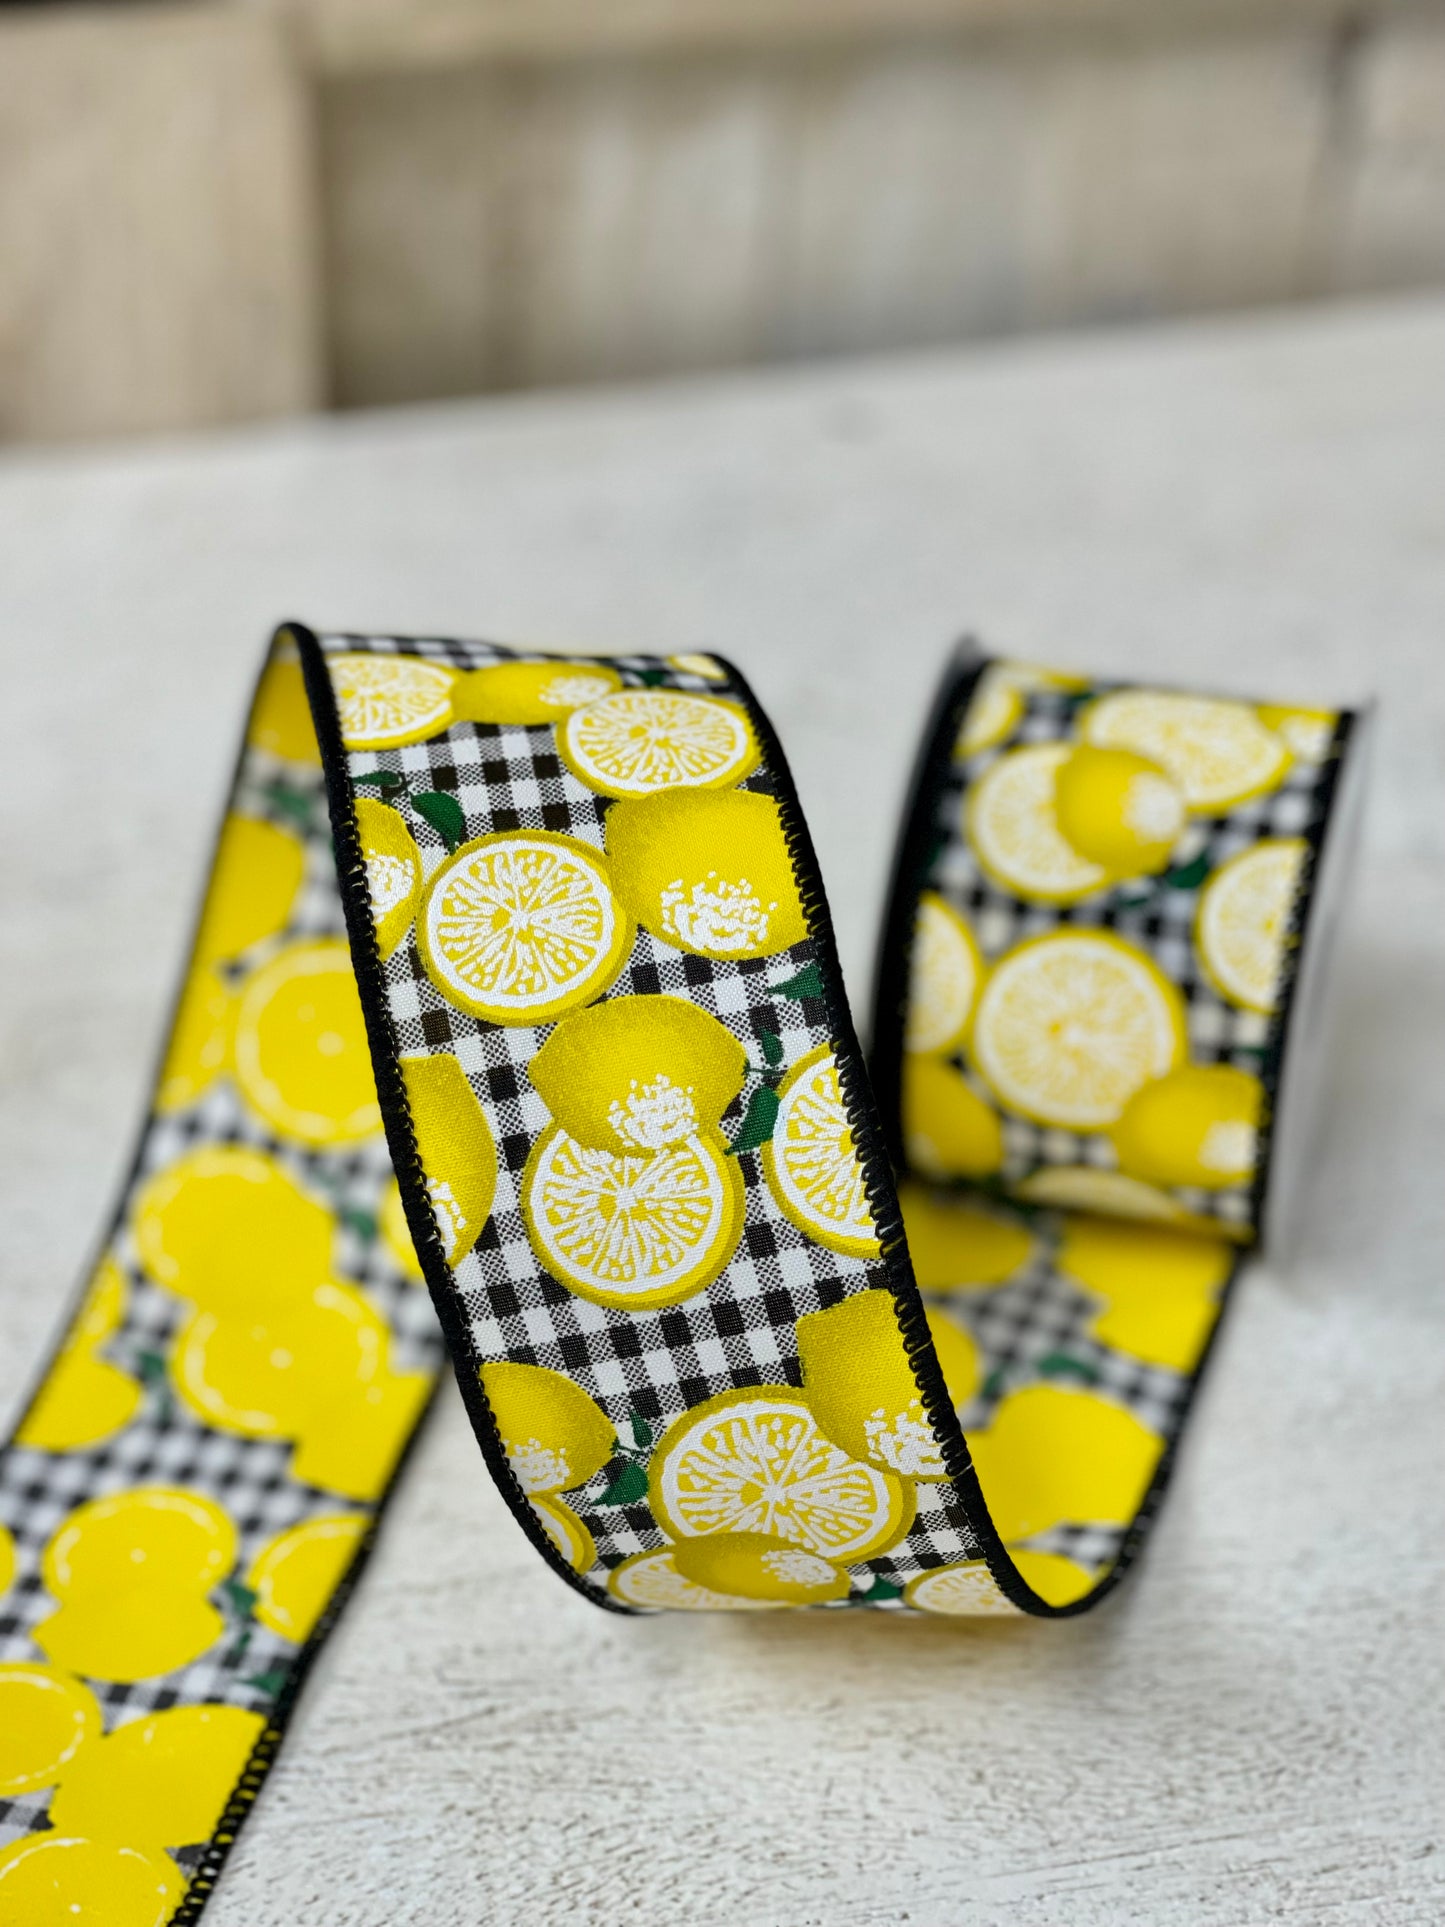 2.5 Inch By 10 Yards Black And White Gingham With Lemon Ribbon